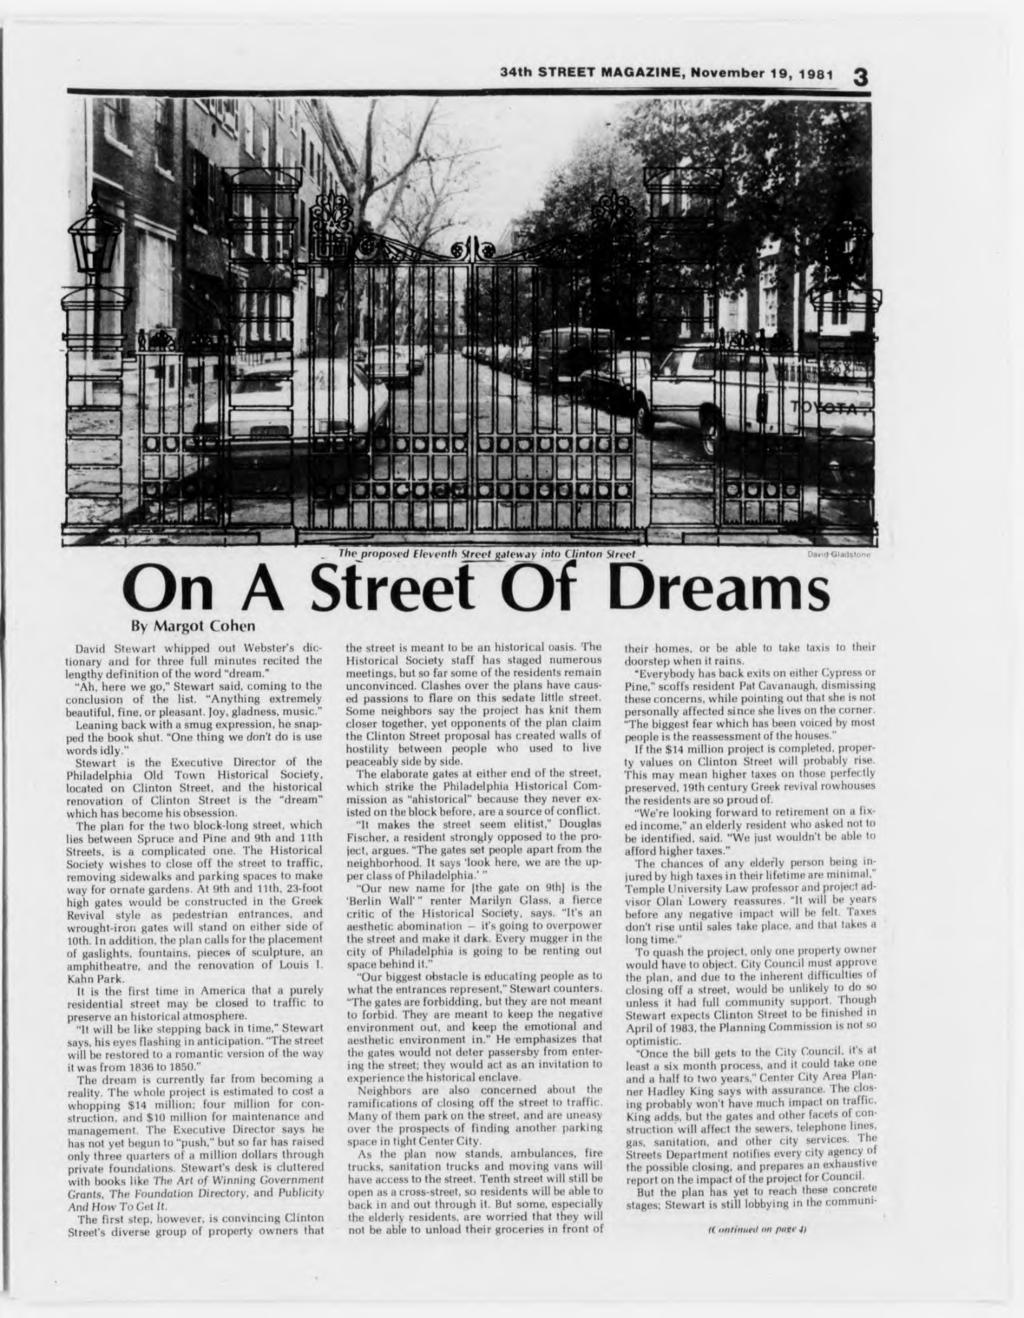 34th STREET MAGAZINE, November 19, 1981 3 Thv proposed Elcwnlh Street Bdlew<i> into Clinton Street David Gladstone On A Street Of Dreams By Margot Cohen David Stewarl whipped out Webster's diclionary